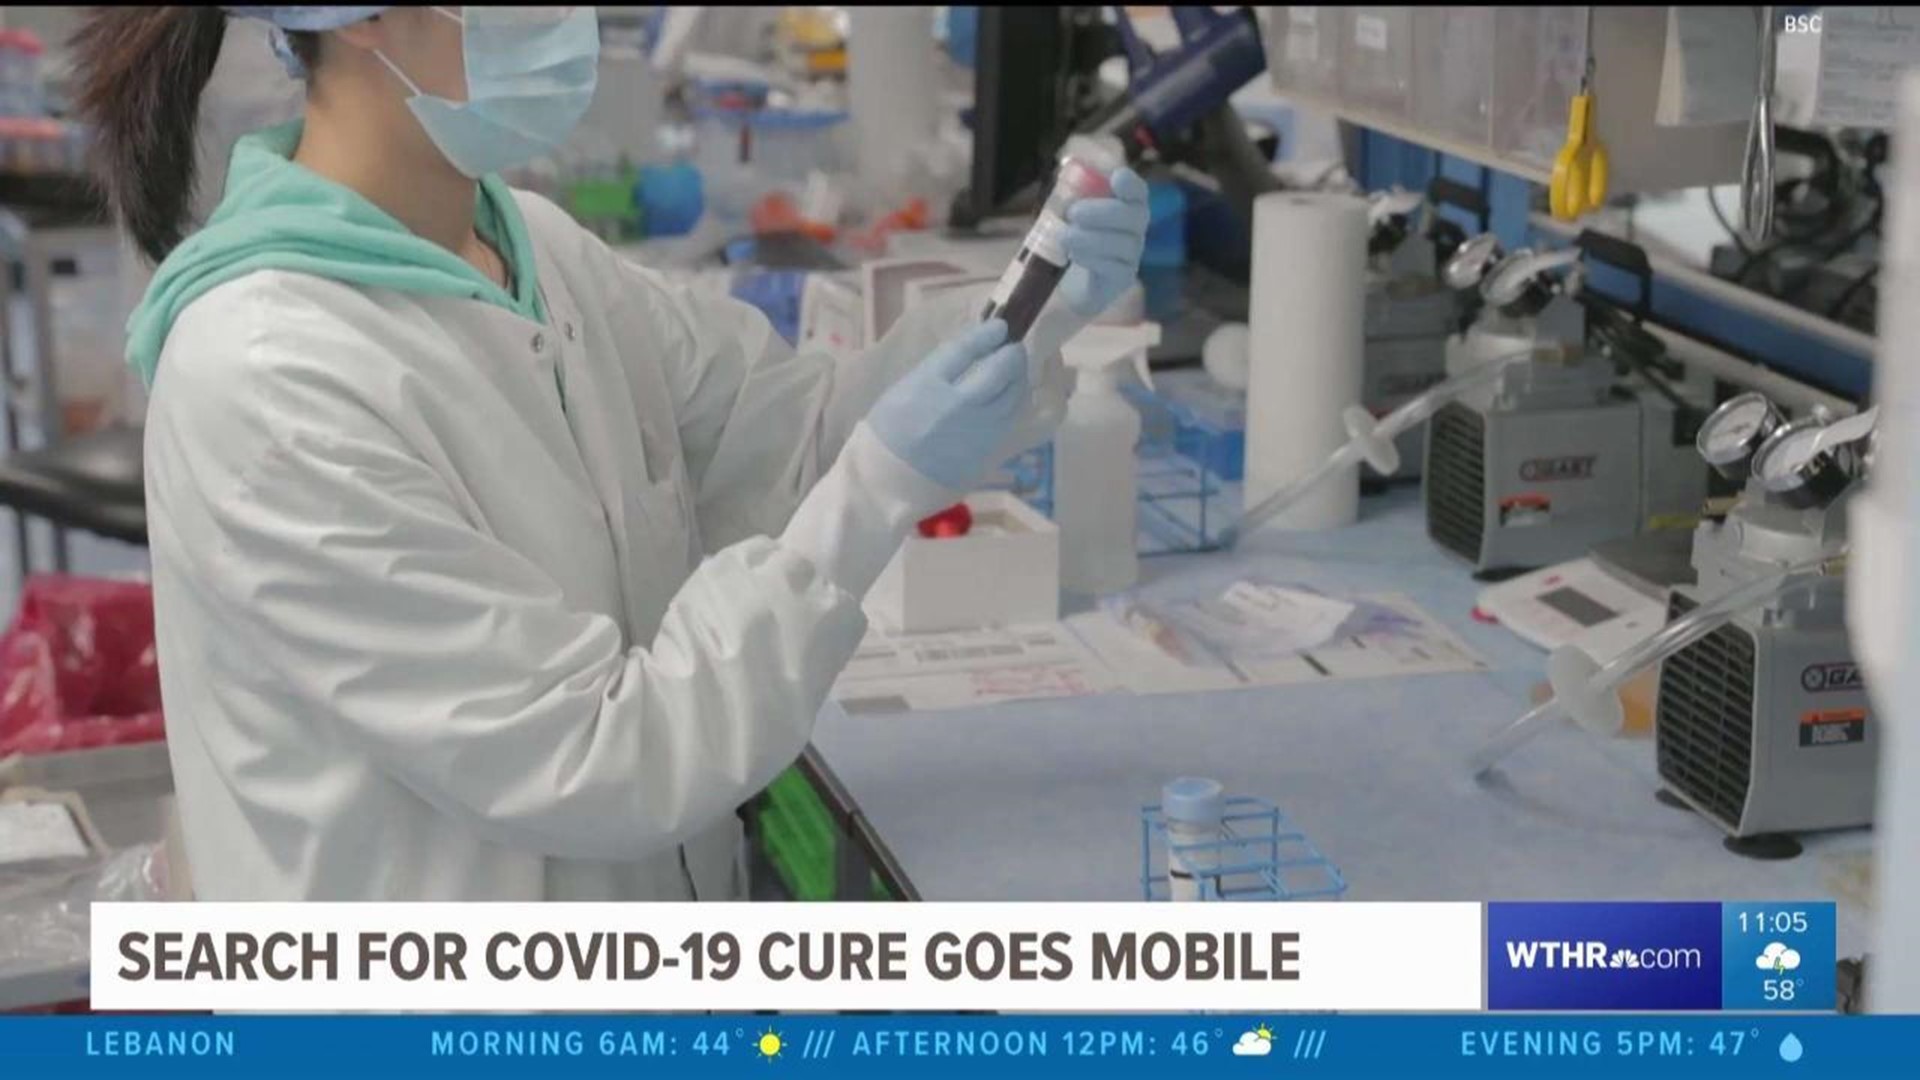 Search for COVID-19 cure goes mobile